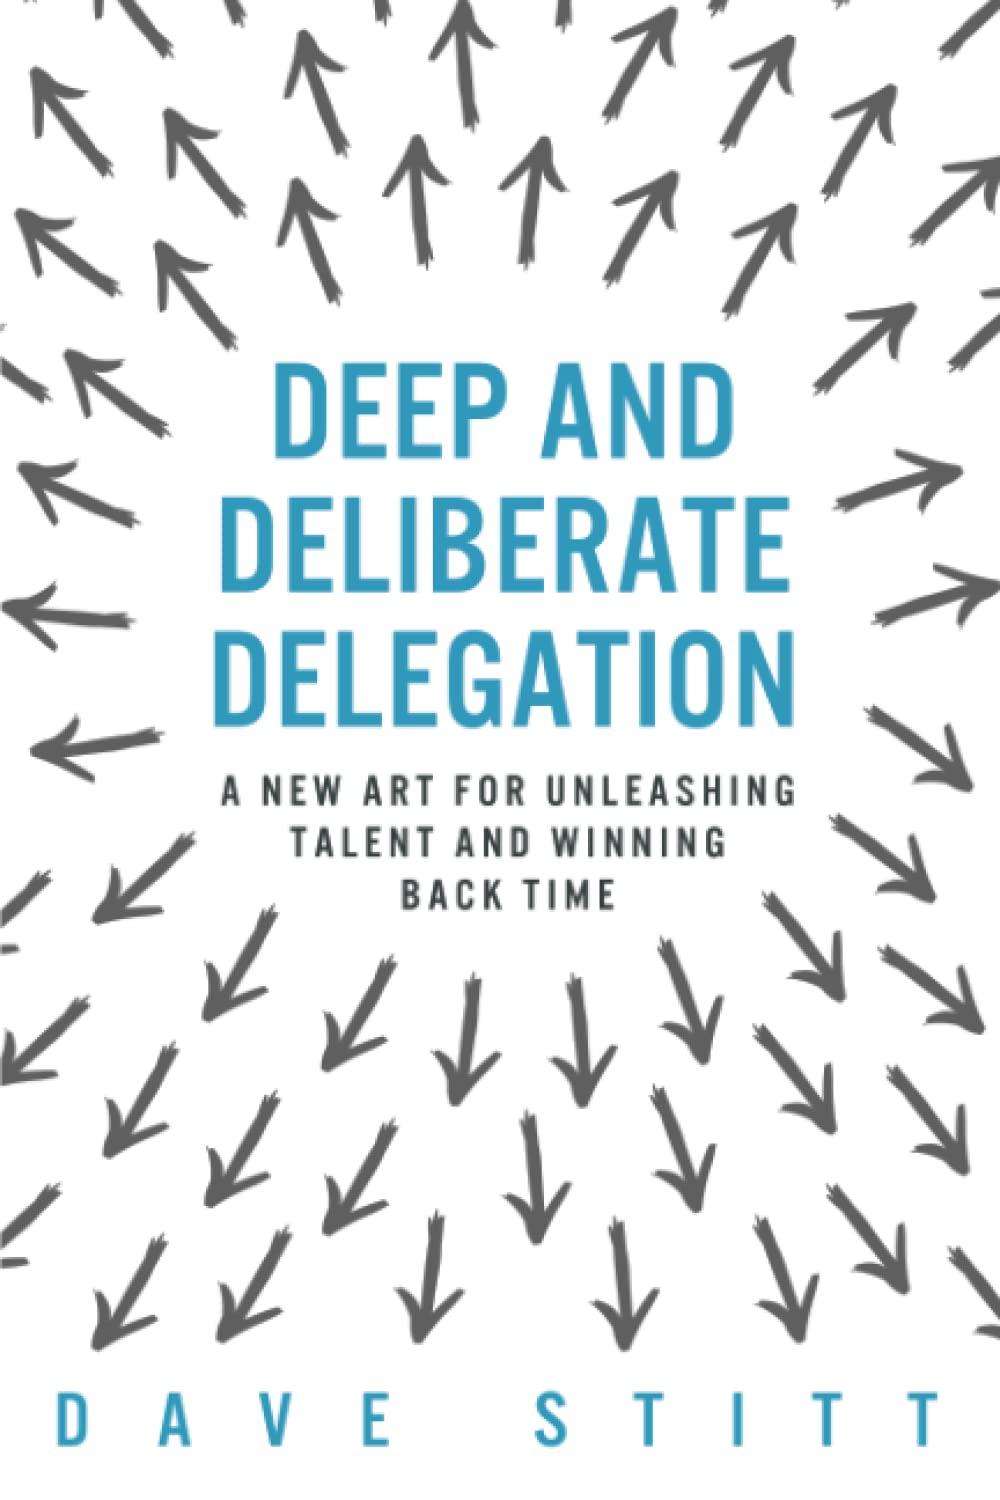 deep and deliberate delegation a new art for unleashing talent and winning back time 1st edition dave stitt